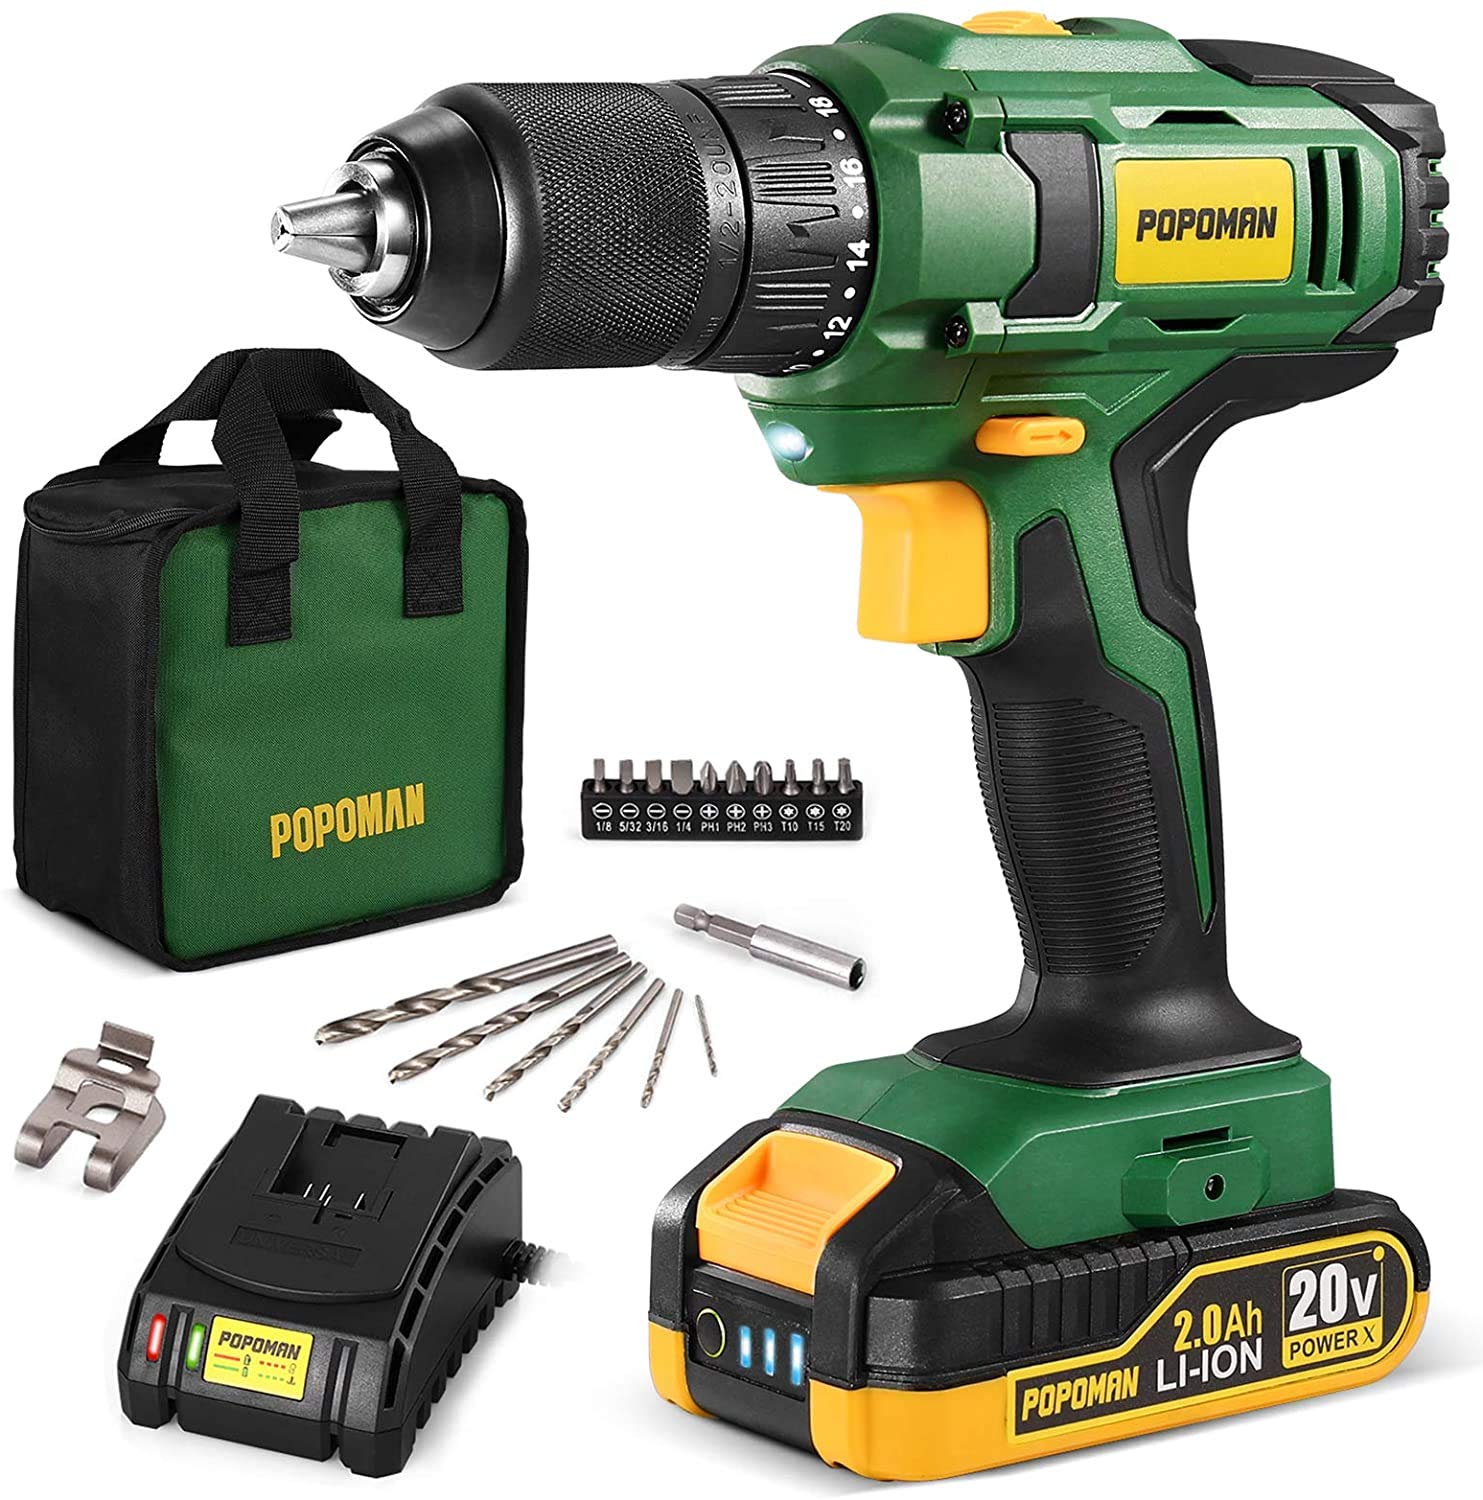 POPOMAN Cordless Drill, 20V MAX 1/2 inch Compact Drill Driver Kit, 2.0Ah Lithium-Ion Battery with Fast Charger, Metal Chuck, 398 In-lbs Torque, 18+1 Position Clutch, 17pcs Drill/Driver Bits - BHD750D